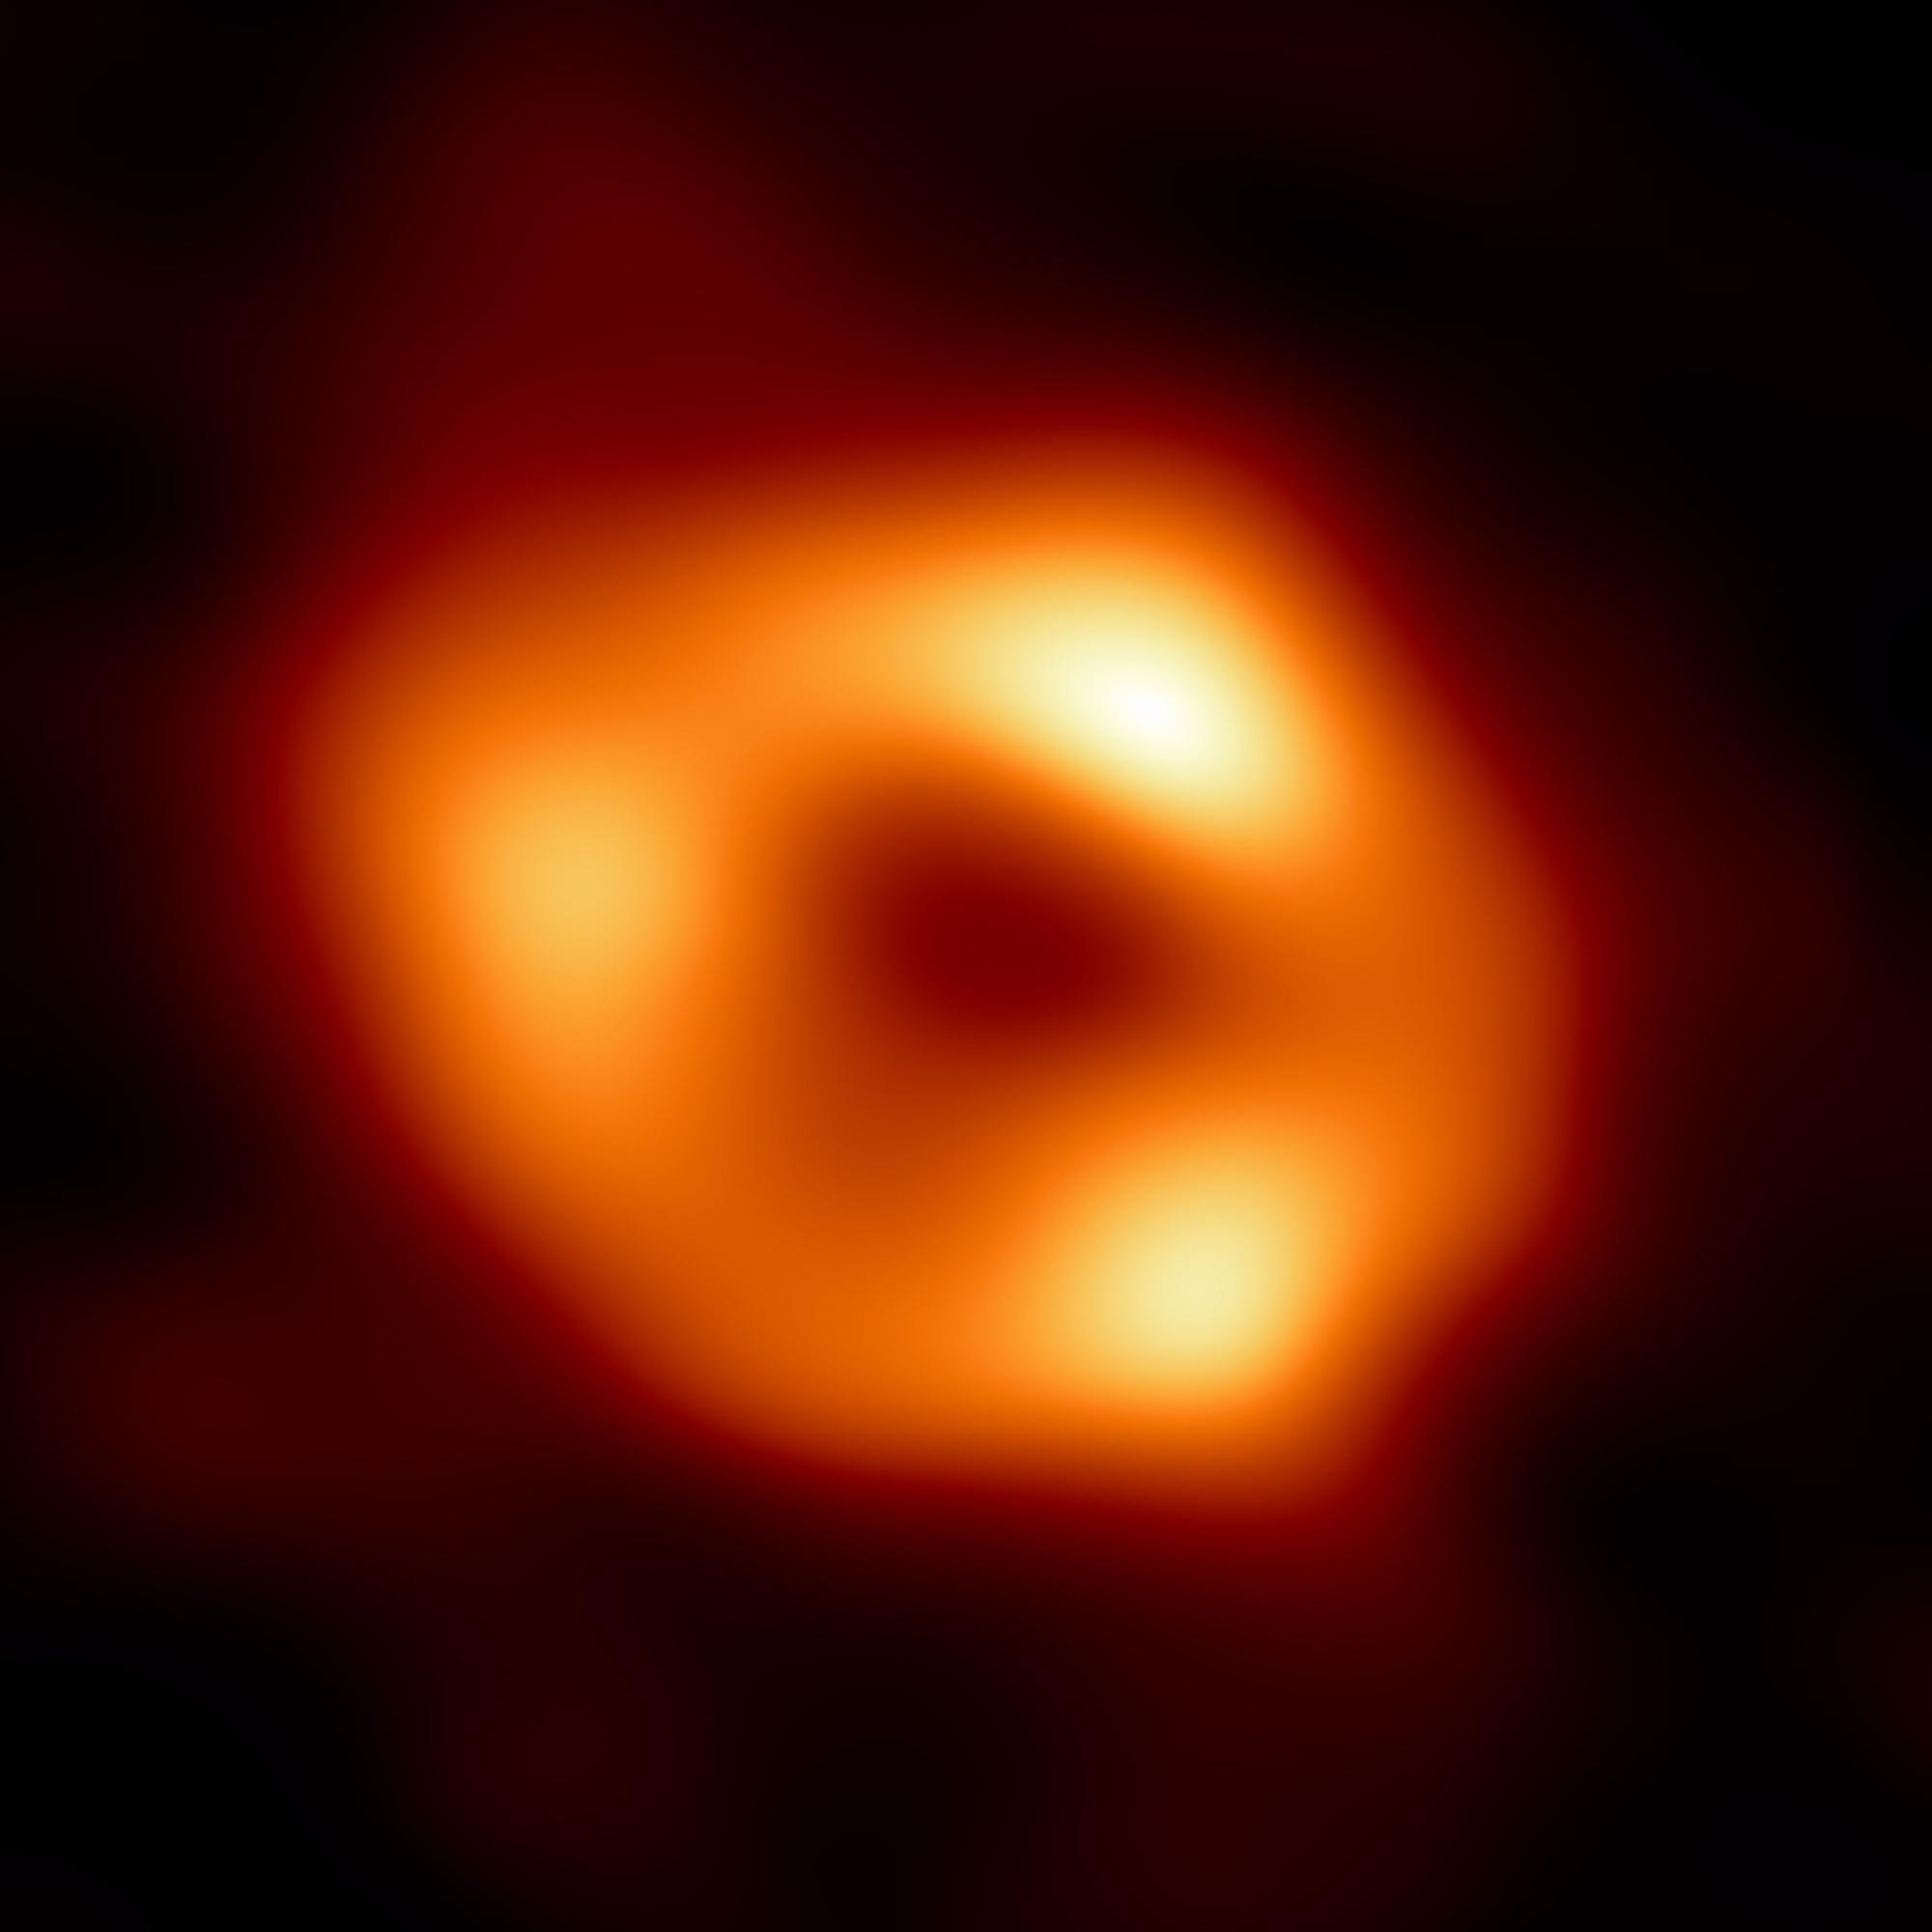 Handout photo from Event Horizon Telescope (EHT) Collaboration showing the first image of Sagittarius A*